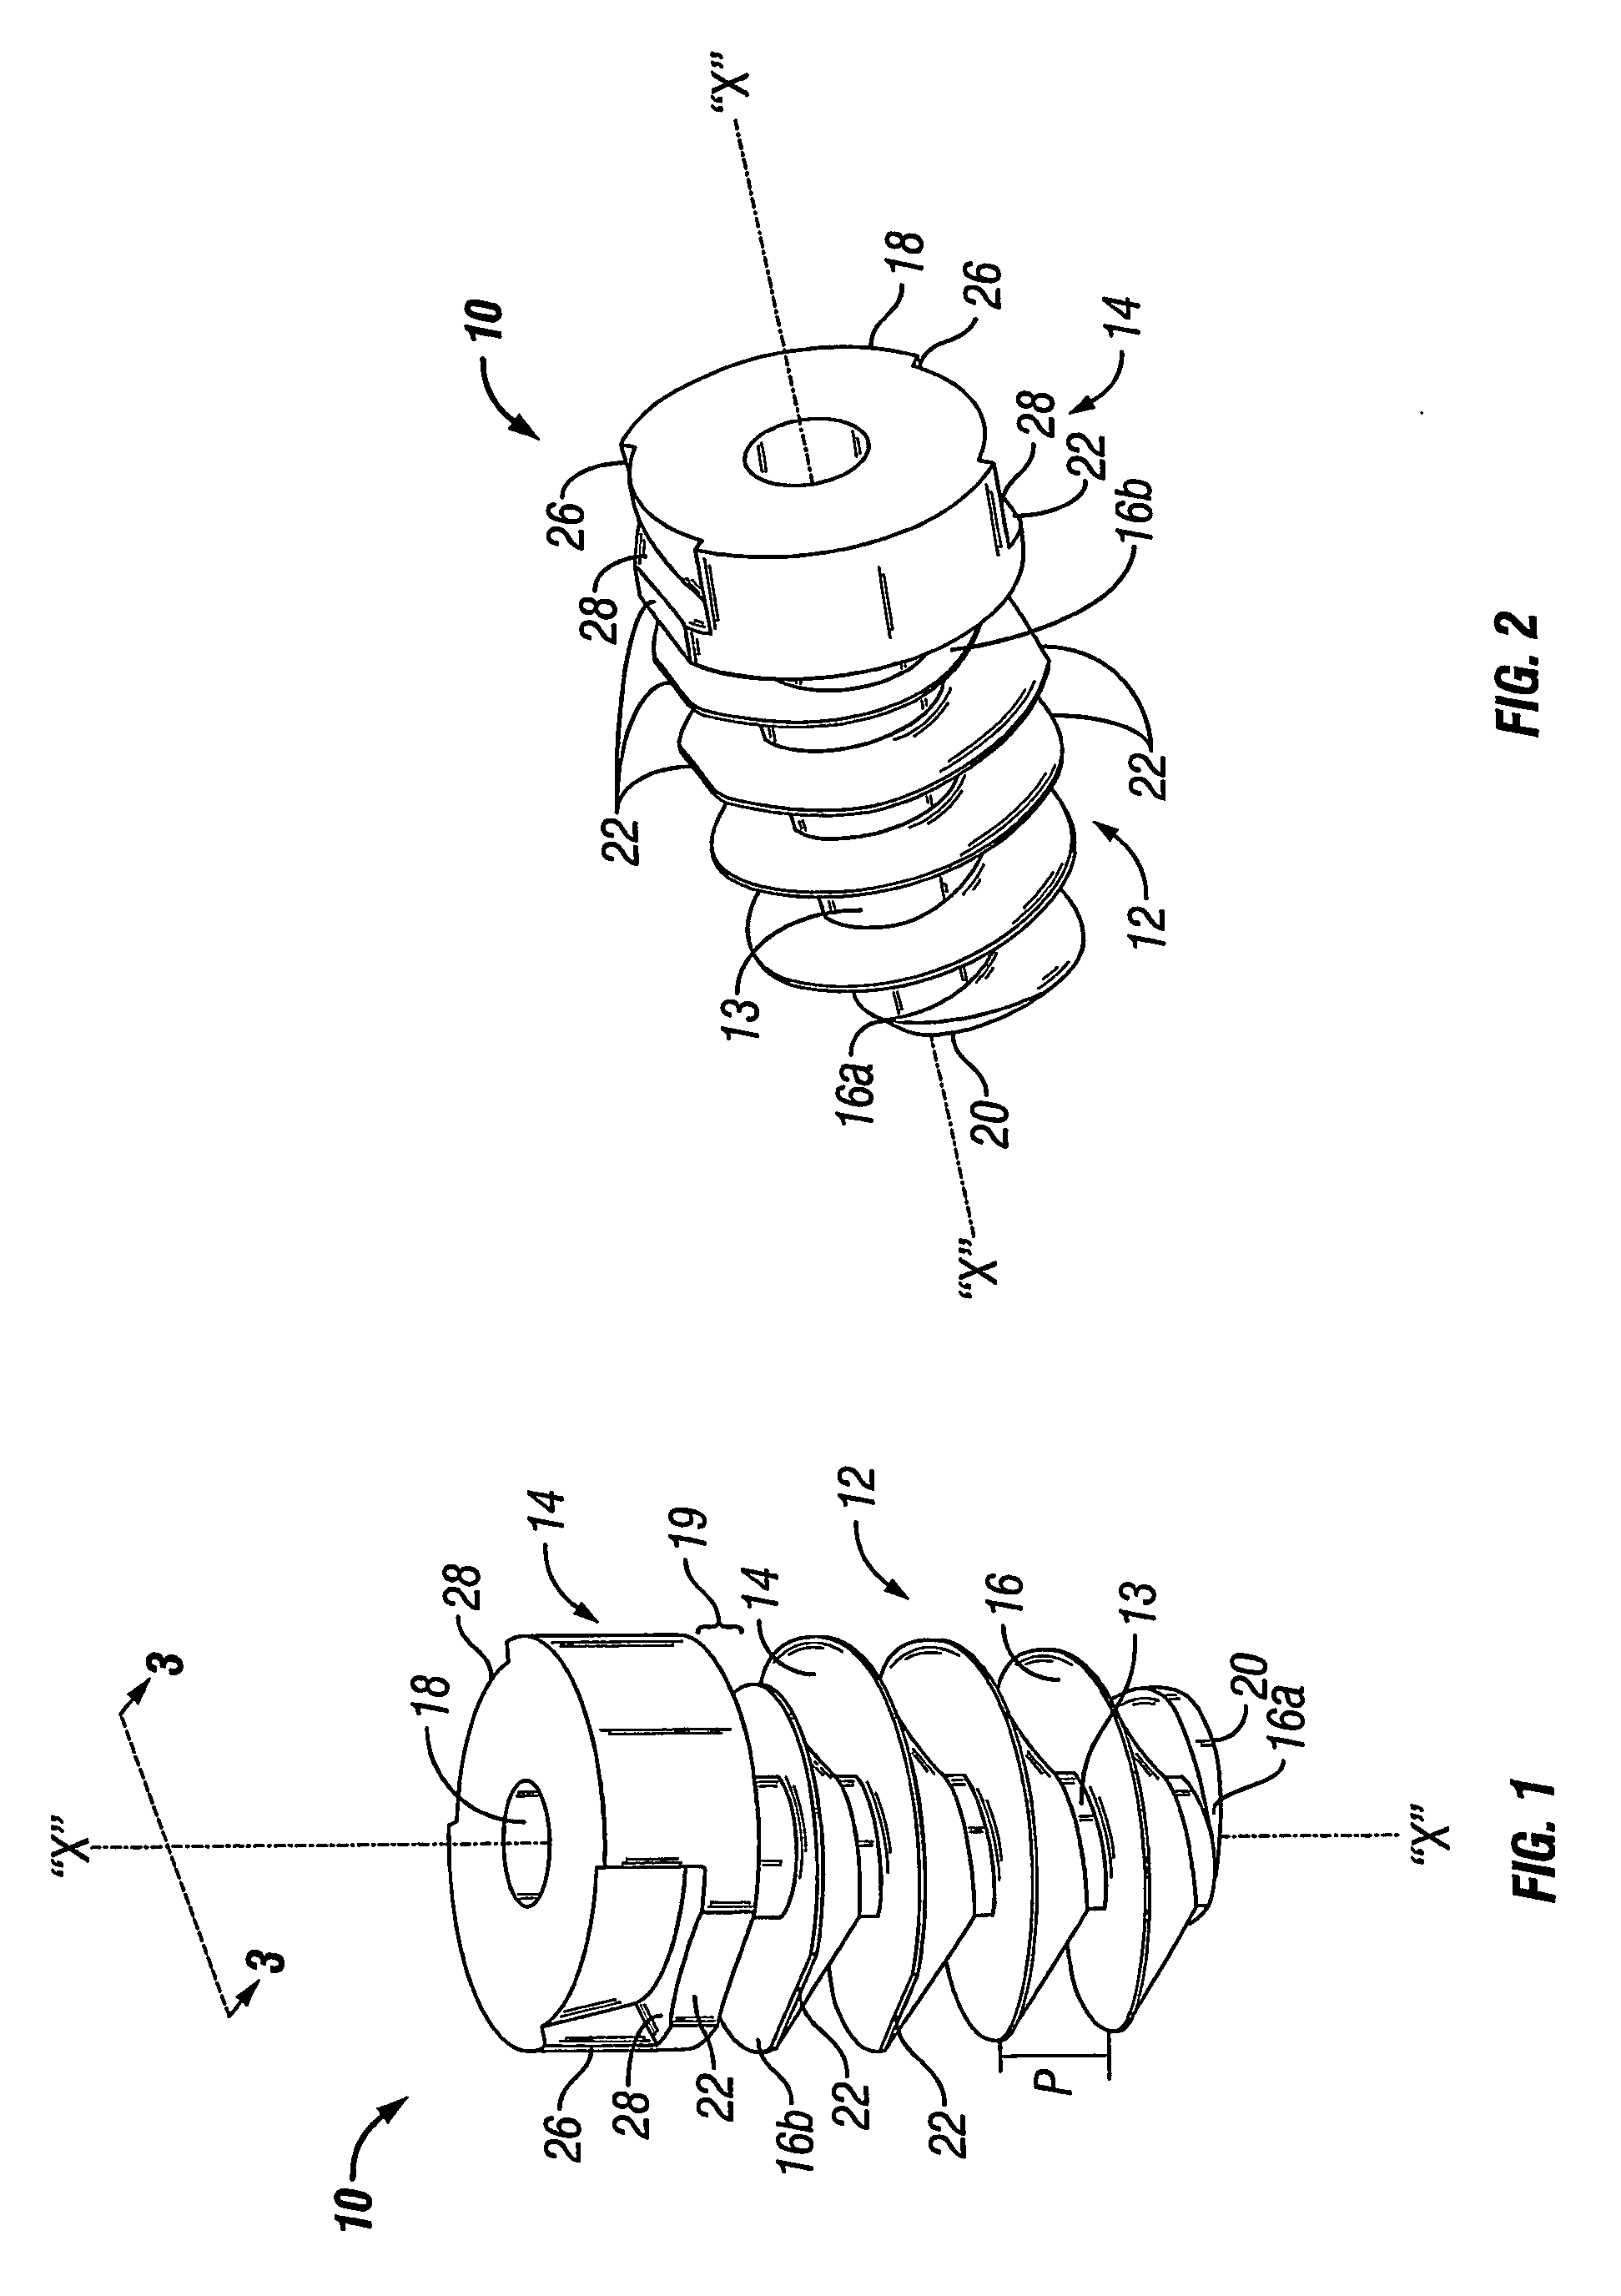 Multiple member interconnect for surgical instrument and absorbable screw fastener